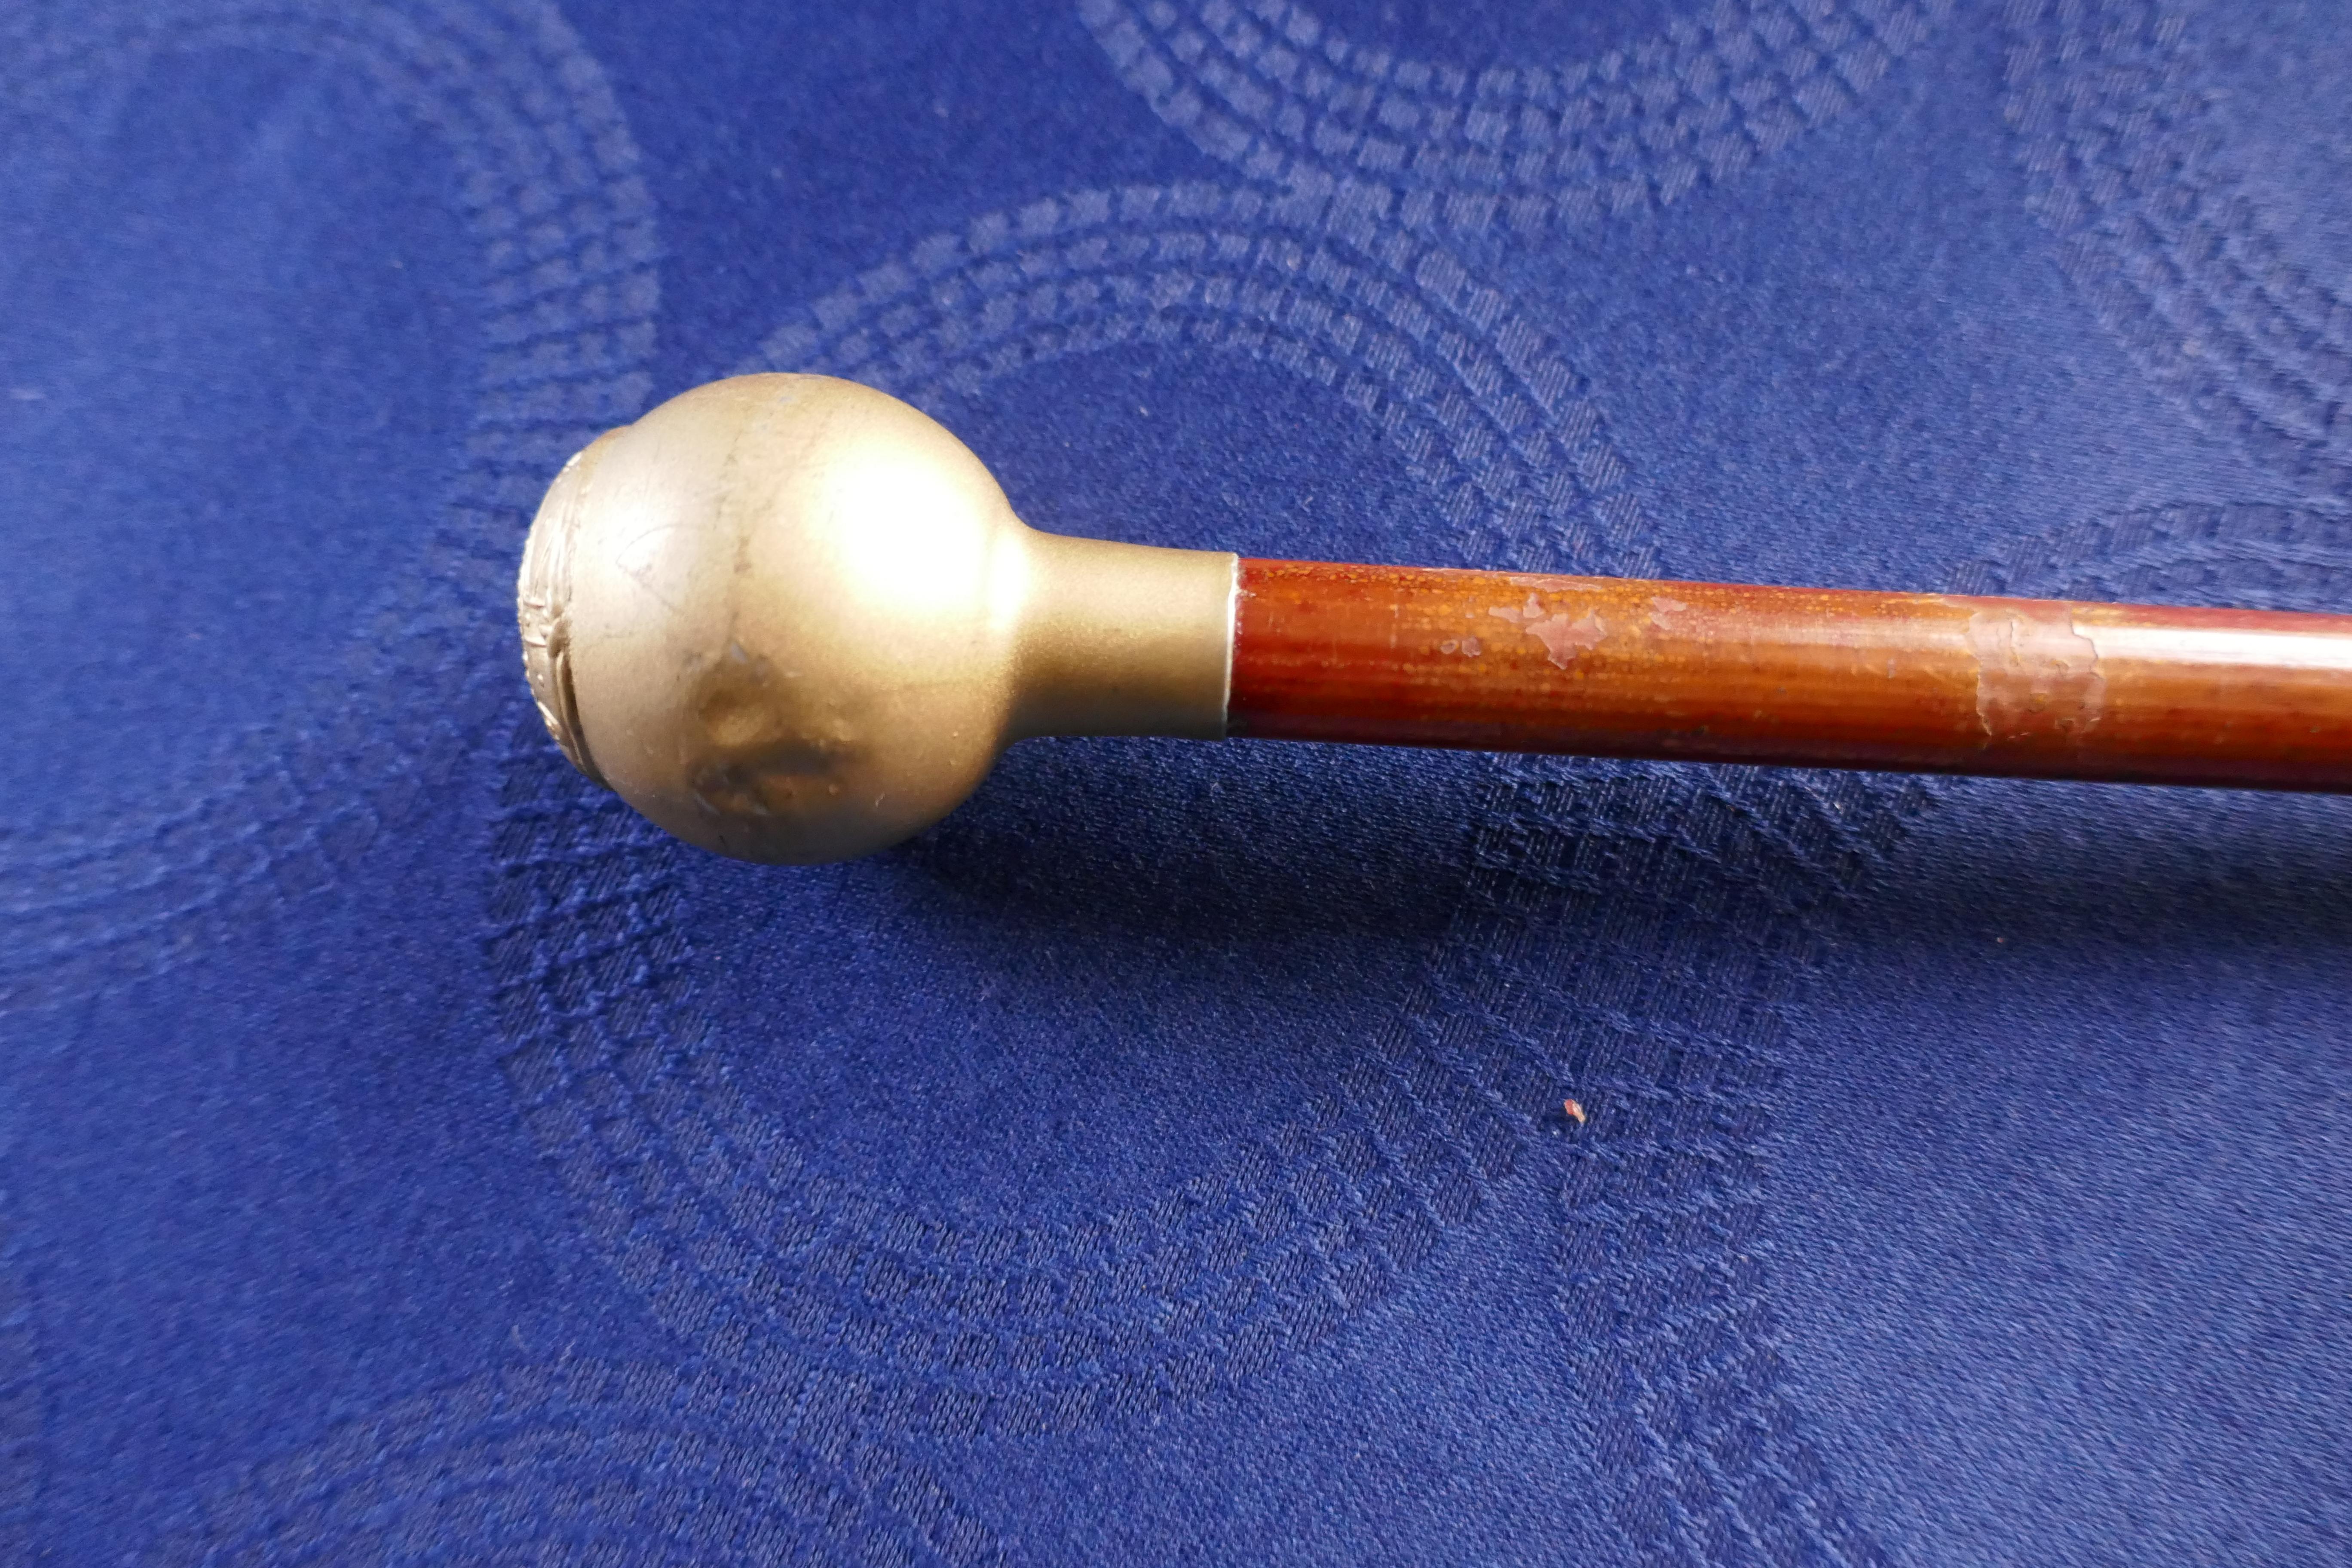 CANFORD SCHOOL O.T.C. swagger stick.

The stick has CANFORD SCHOOL O.T.C. crest on the round head
The metal top appears to be a white metal overprinted to look like brass
The stick has a strong cane shaft and an original metal ferrule

The